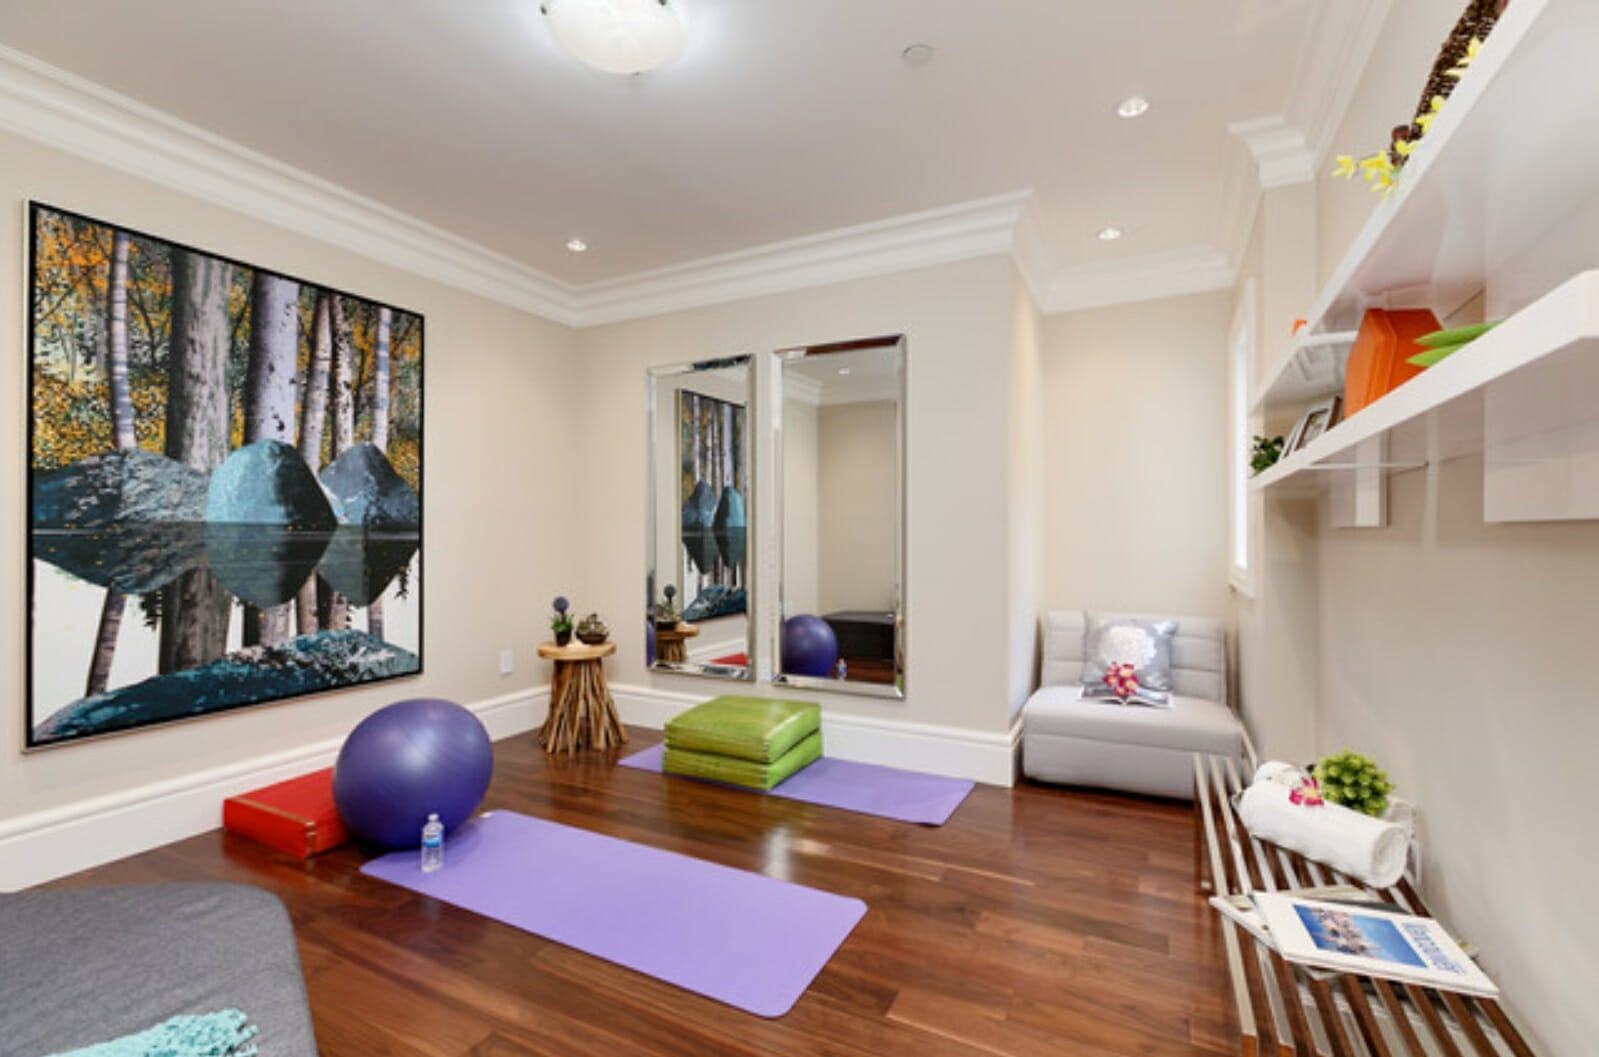 Before & After: Colorful and Calming Yoga Room Design - Decorilla Online  Interior Design